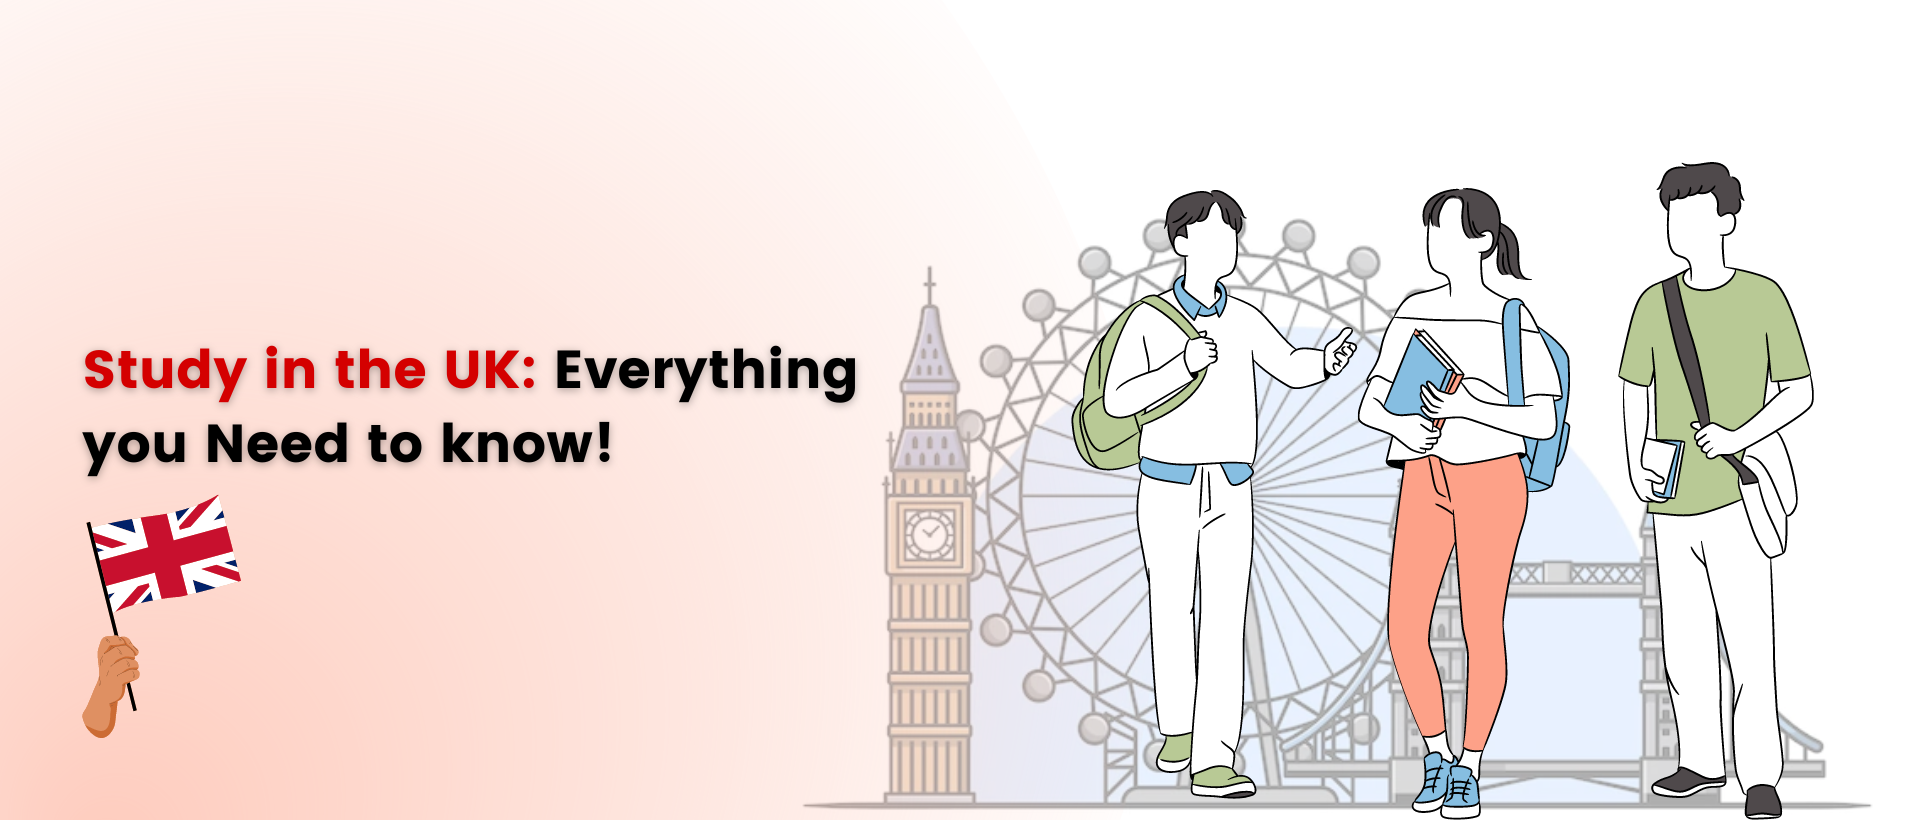 Study in the UK: Everything you Need to know!